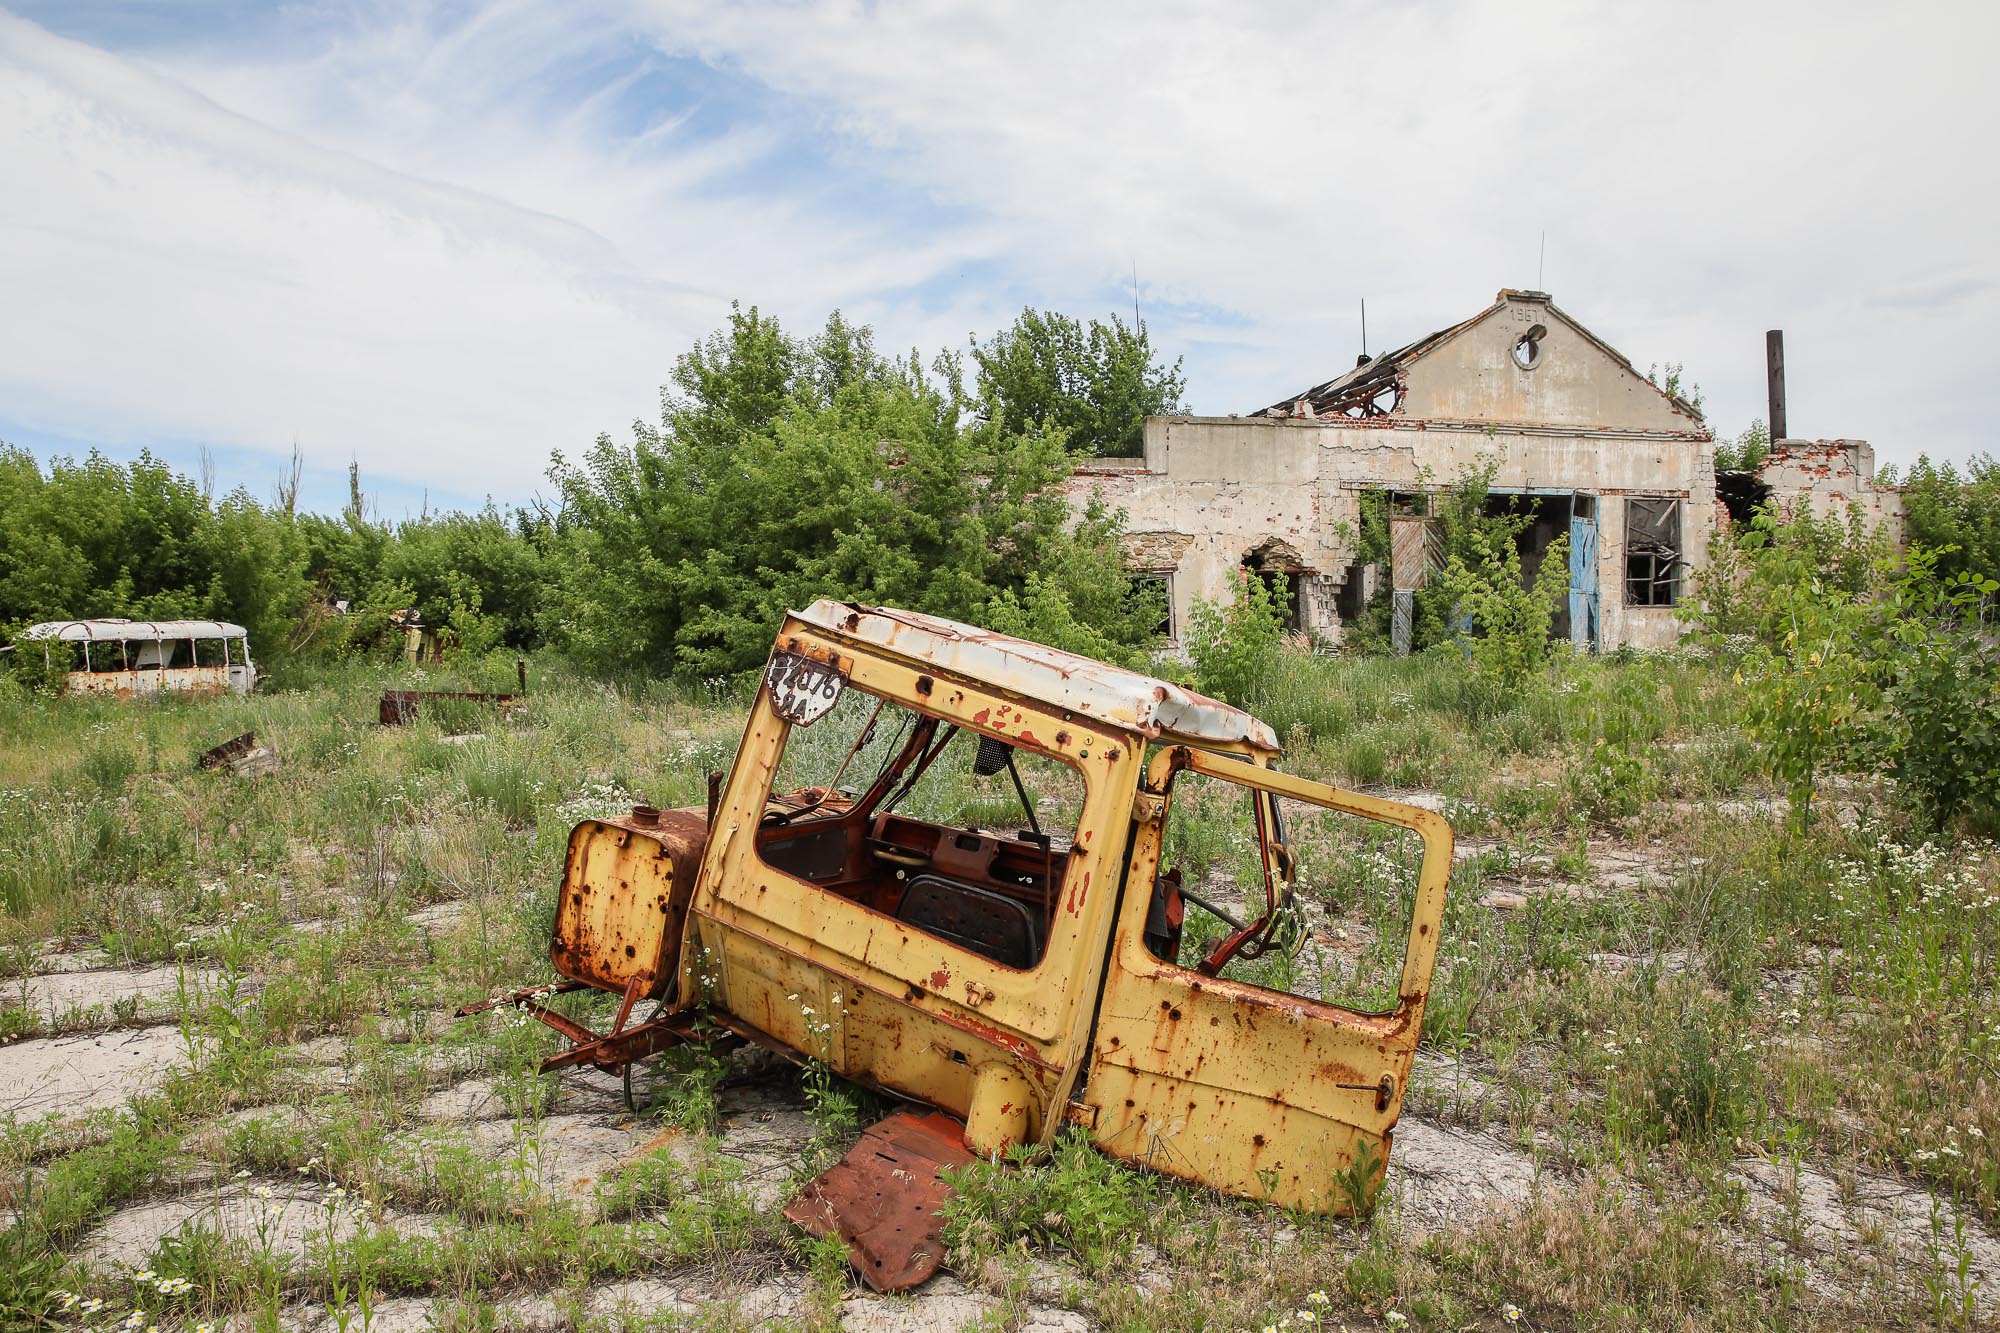 Ruins of an agricultural manufacture building destroyed in shelling, pictured in the town of Opytne, eastern Ukraine, on June 12, 2019.